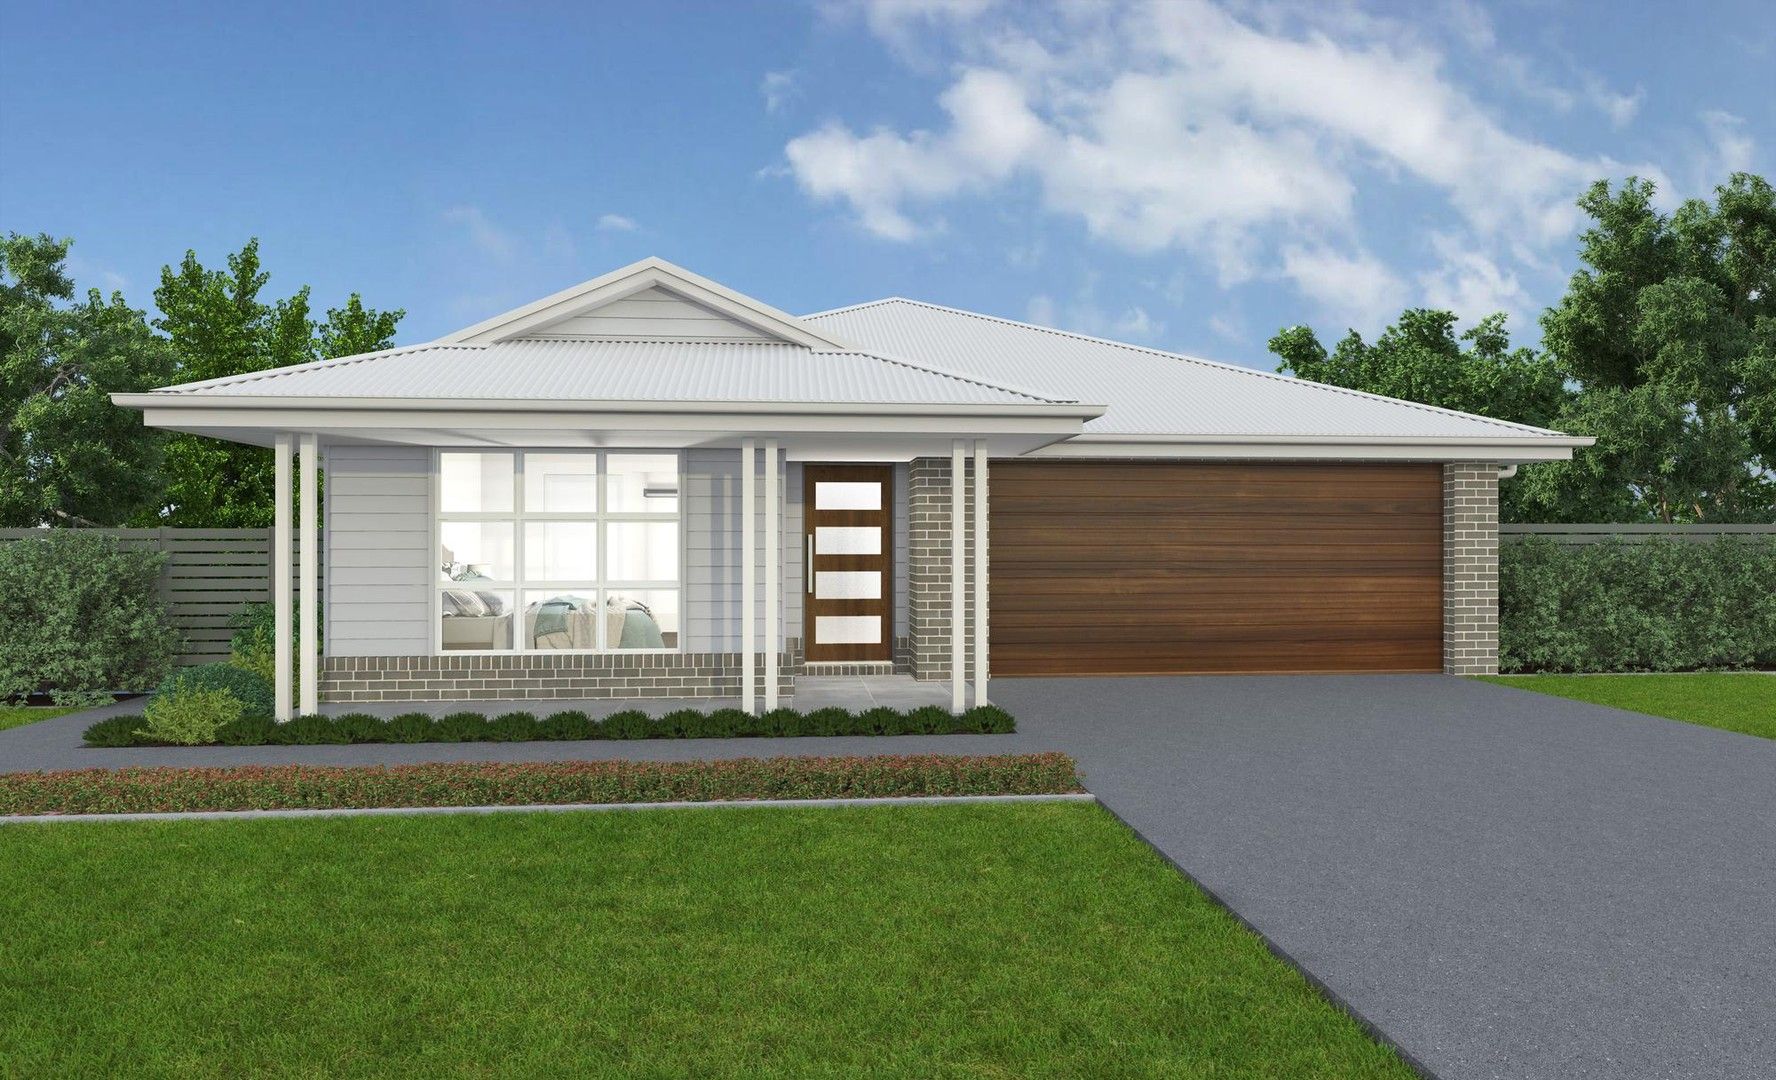 4 bedrooms New House & Land in 106 Riberry Road PORT MACQUARIE NSW, 2444